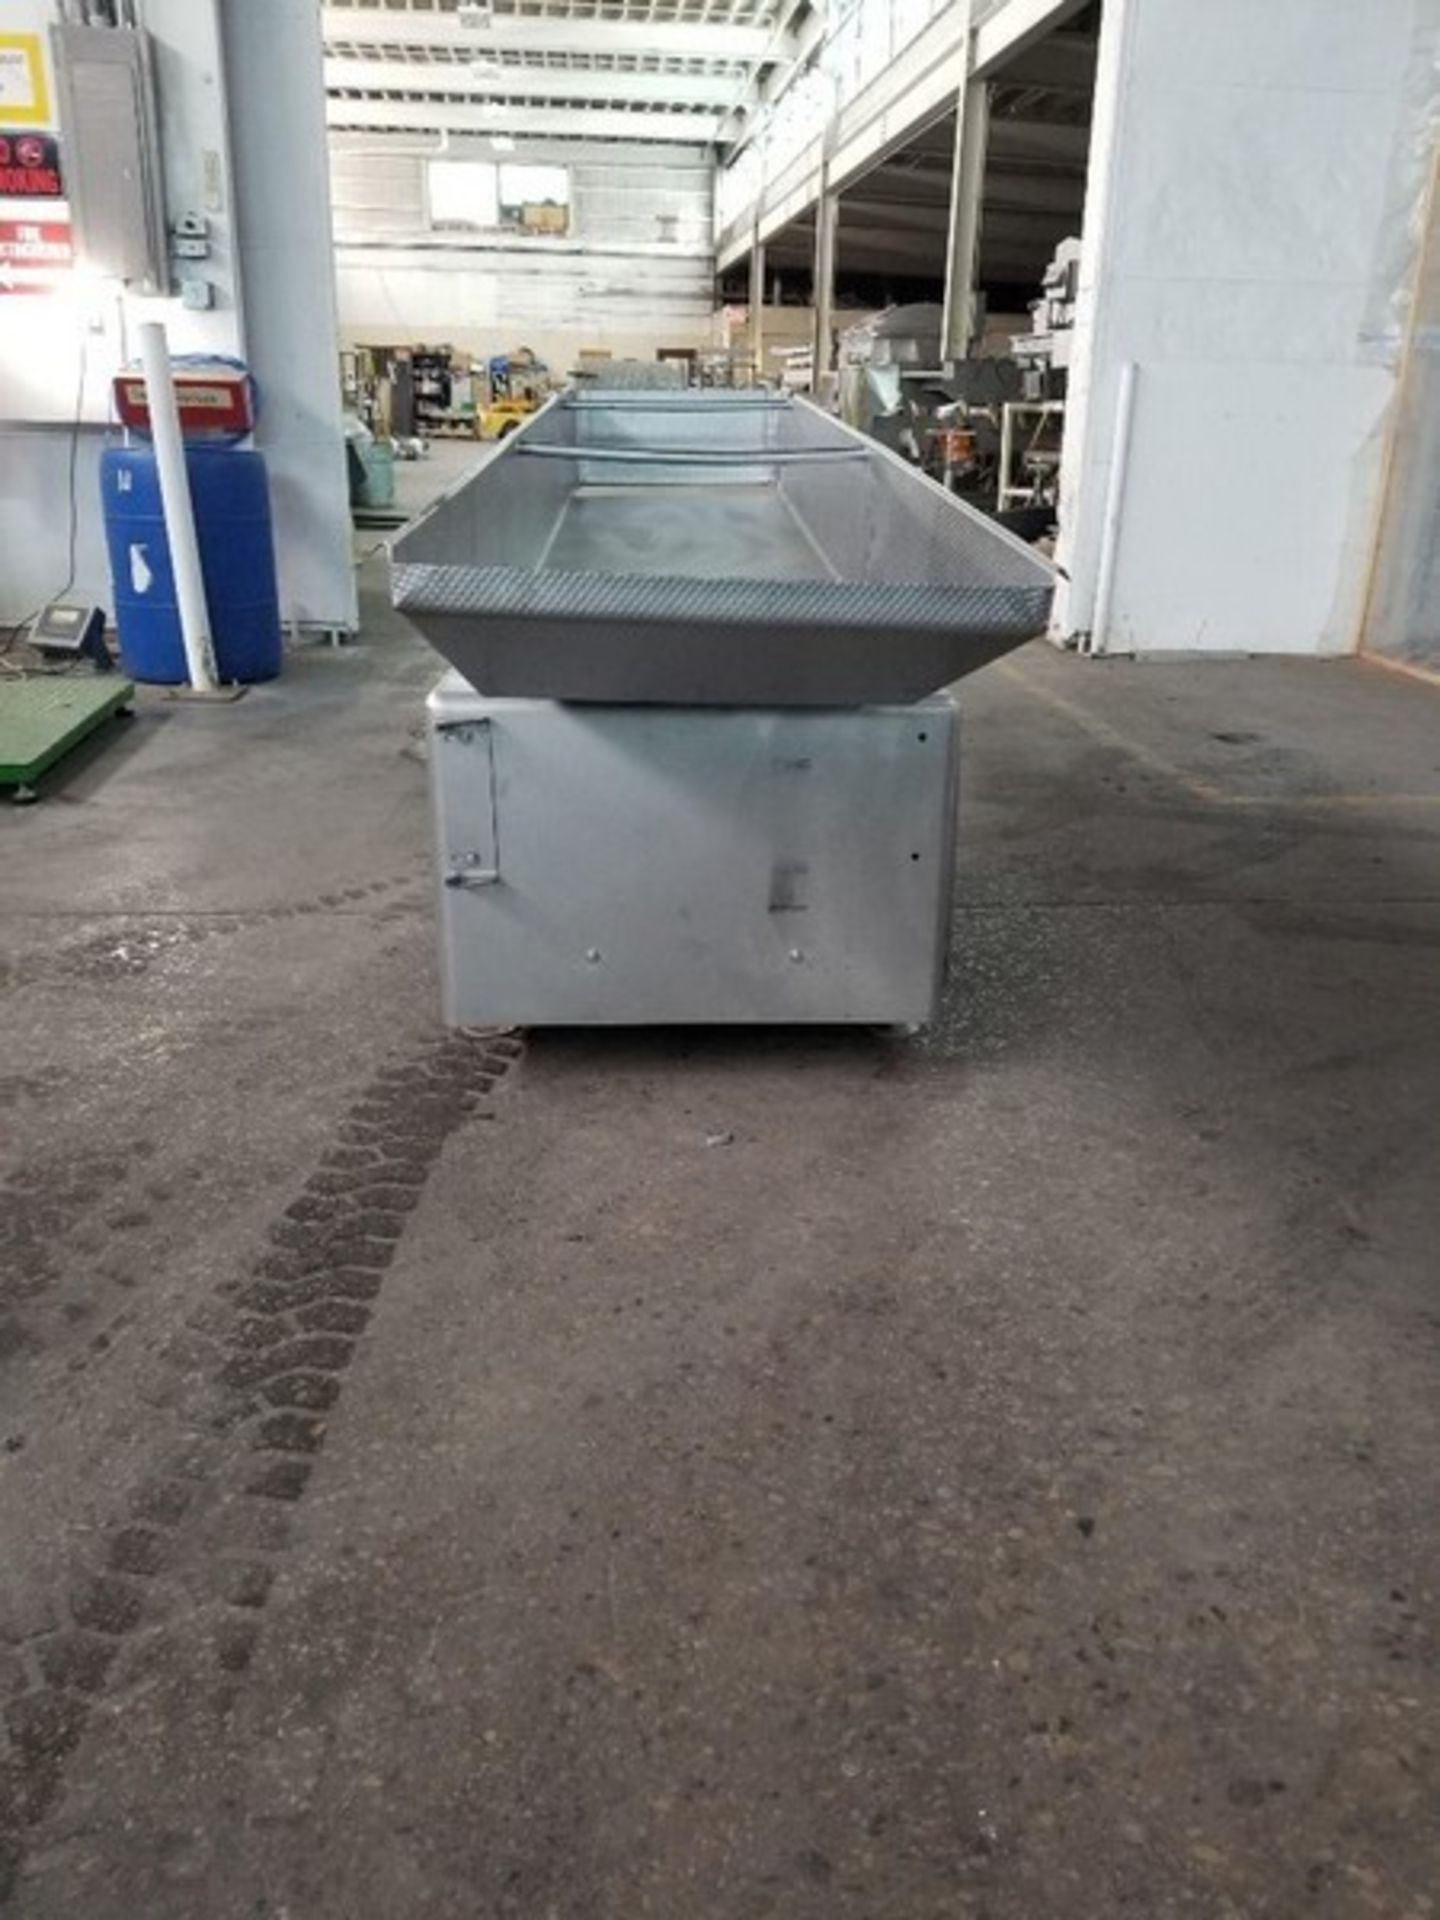 S/S Sanitary Vibratory Scale Feeder, Aprox. 24" W x 132" L. Last Used in Food Industry. Unit Removed - Bild 6 aus 9